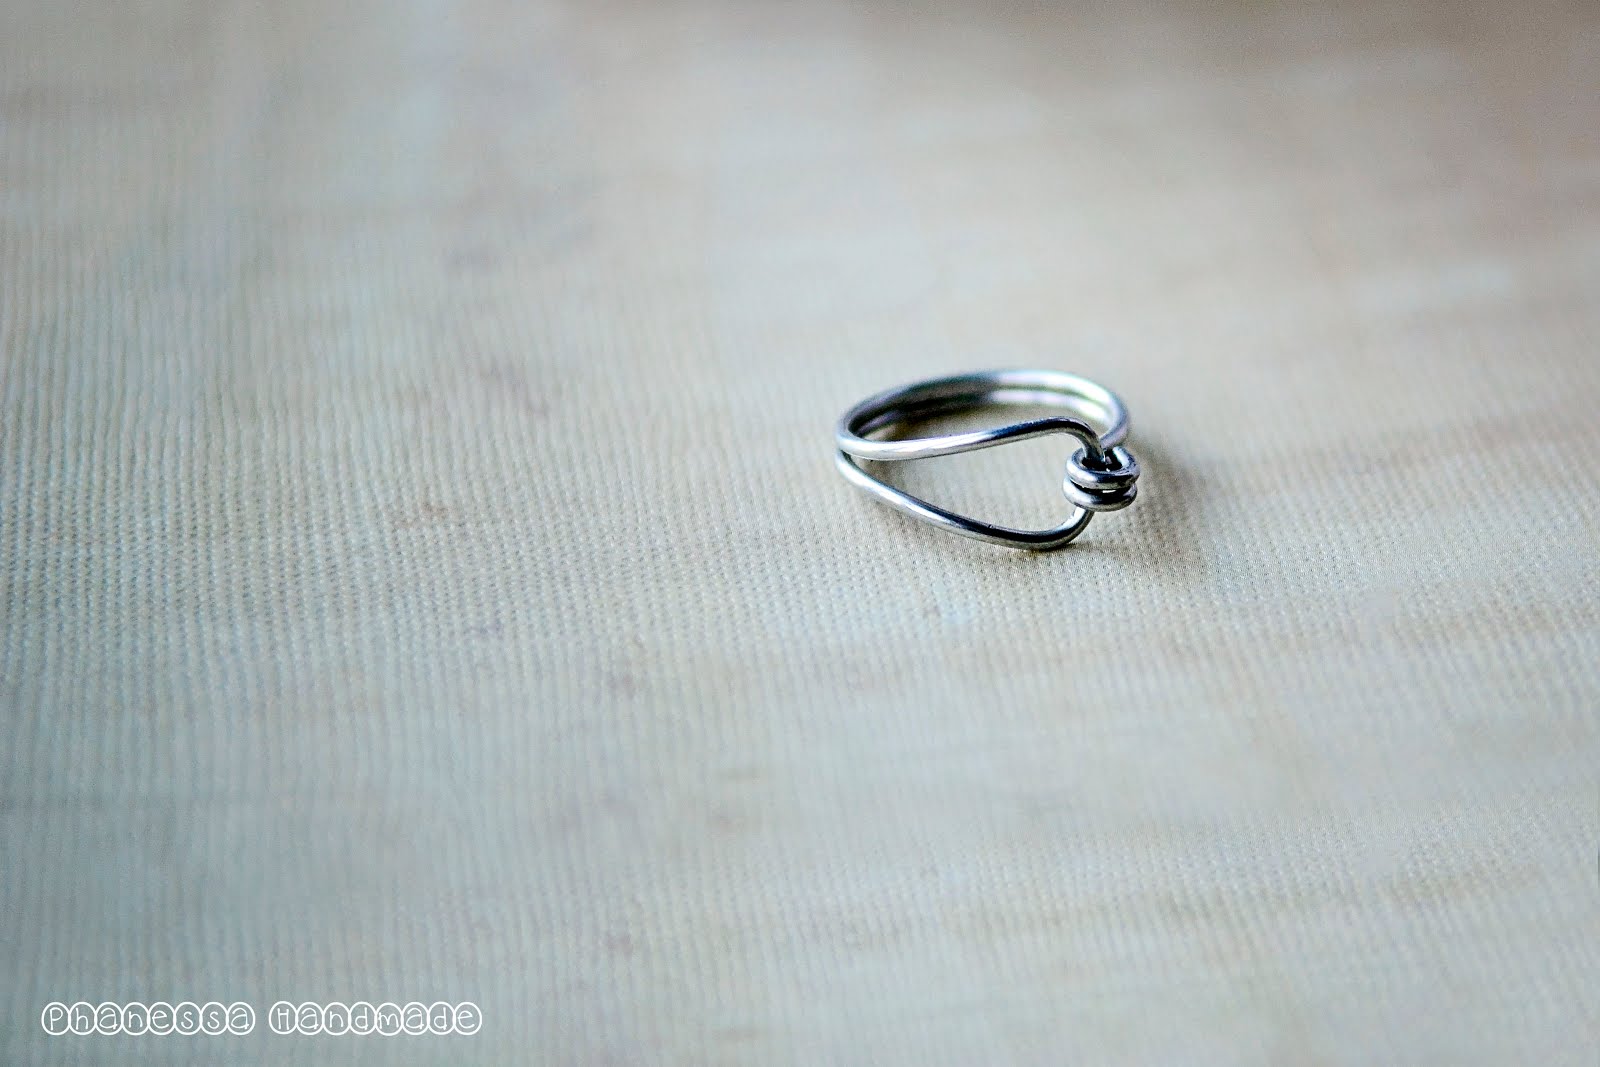 Phanessa's Crafts: DIY Wire Rings